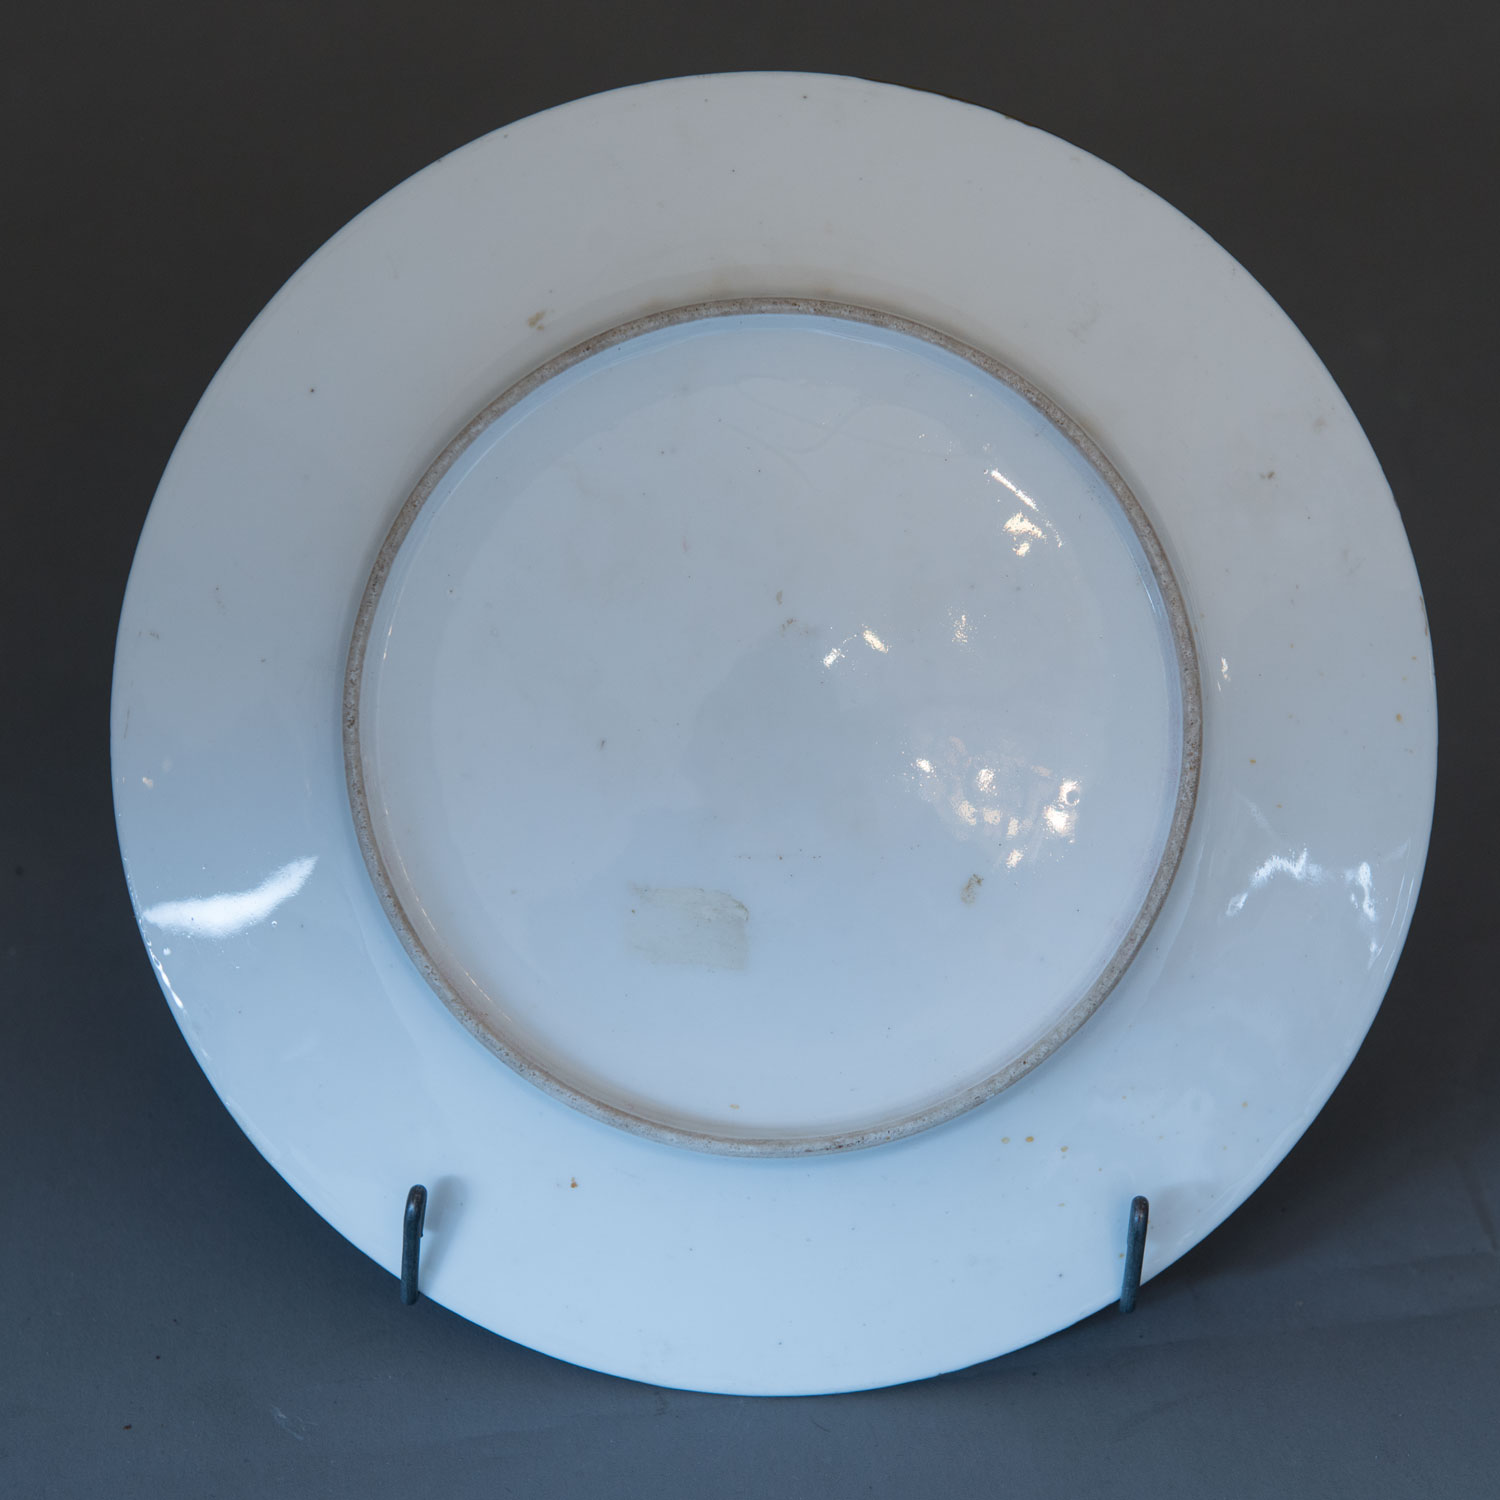 Baltic or Russian Porcelain Dish - Image 3 of 3